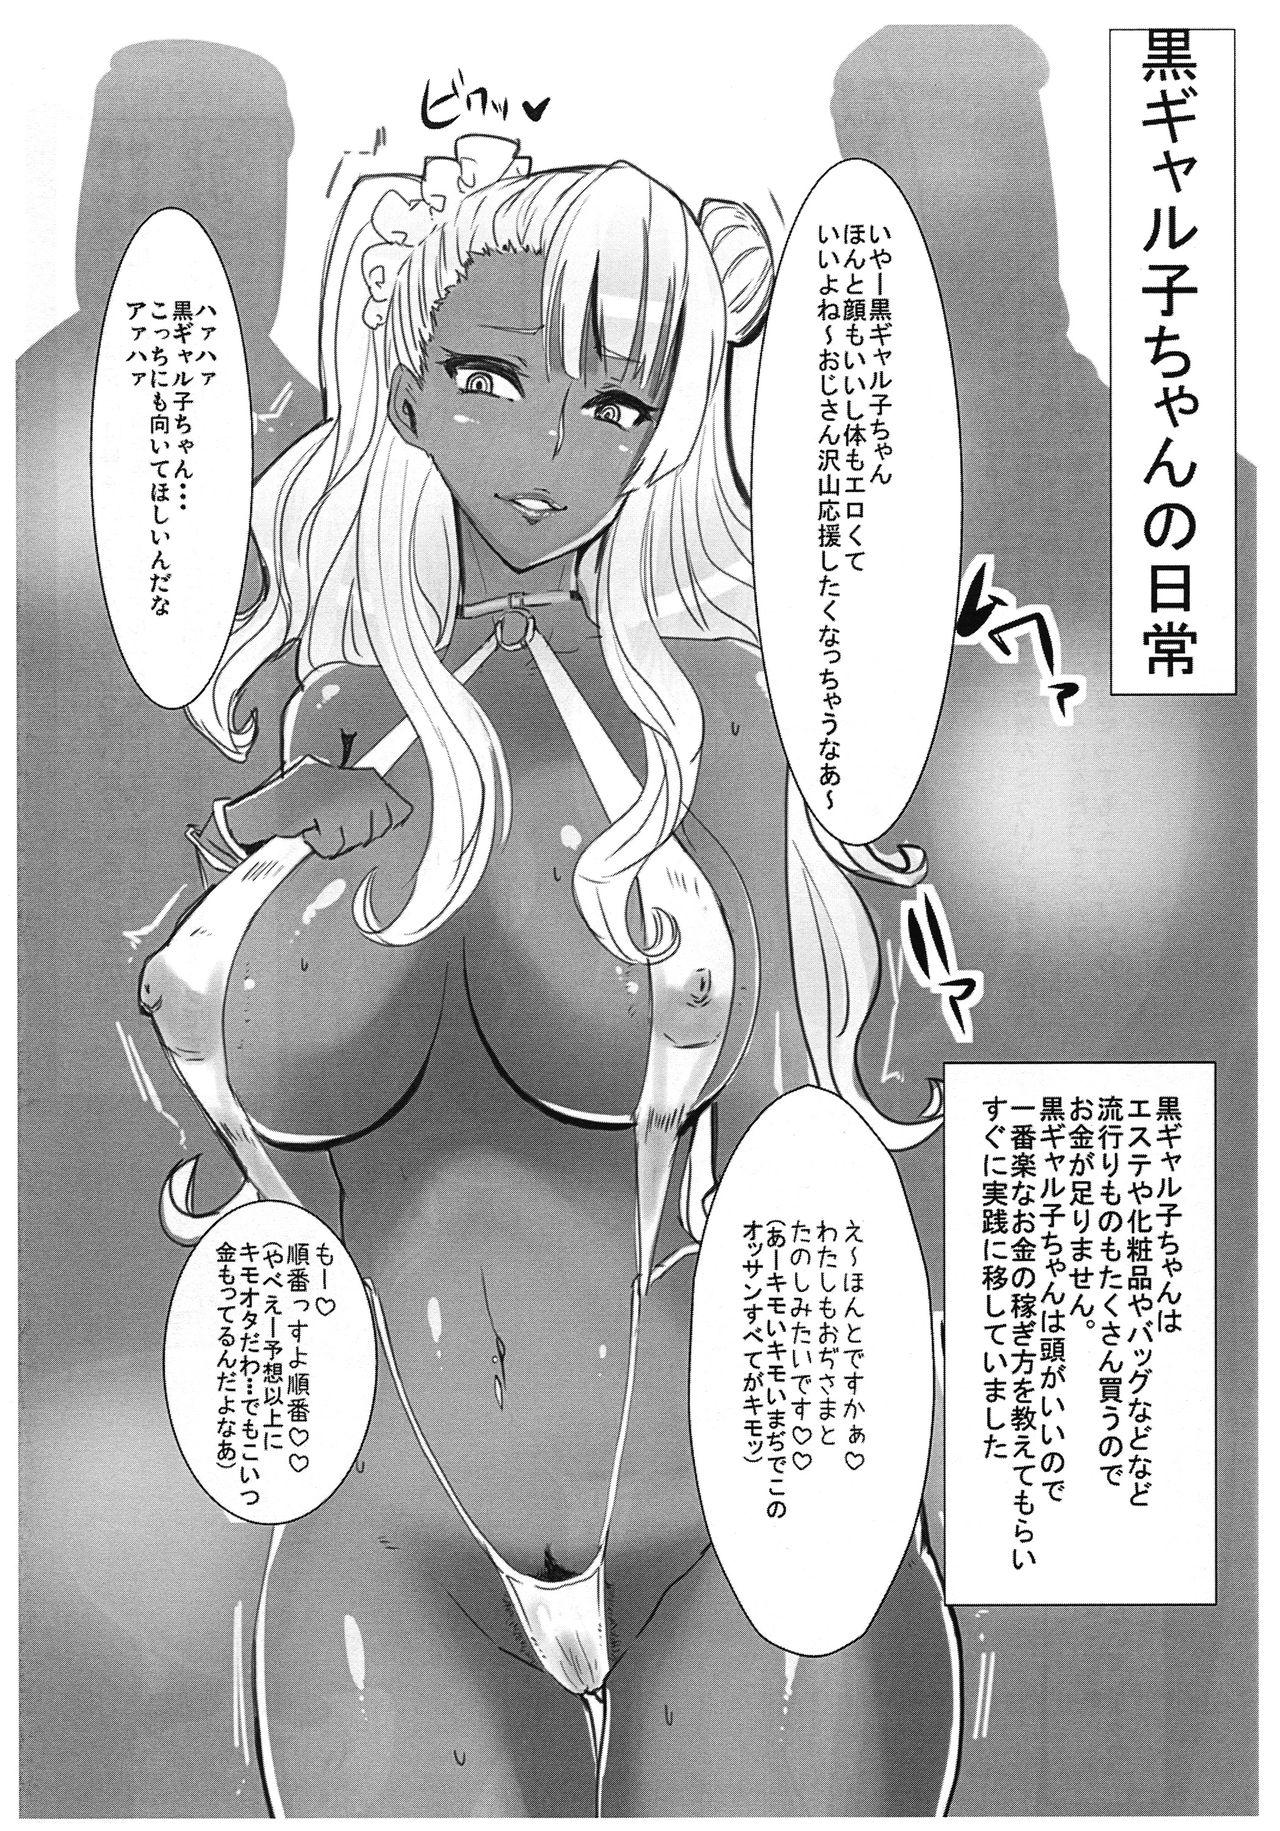 Scissoring PROSTITUTE² +VER3.0 - Oshiete galko-chan Small Boobs - Page 10